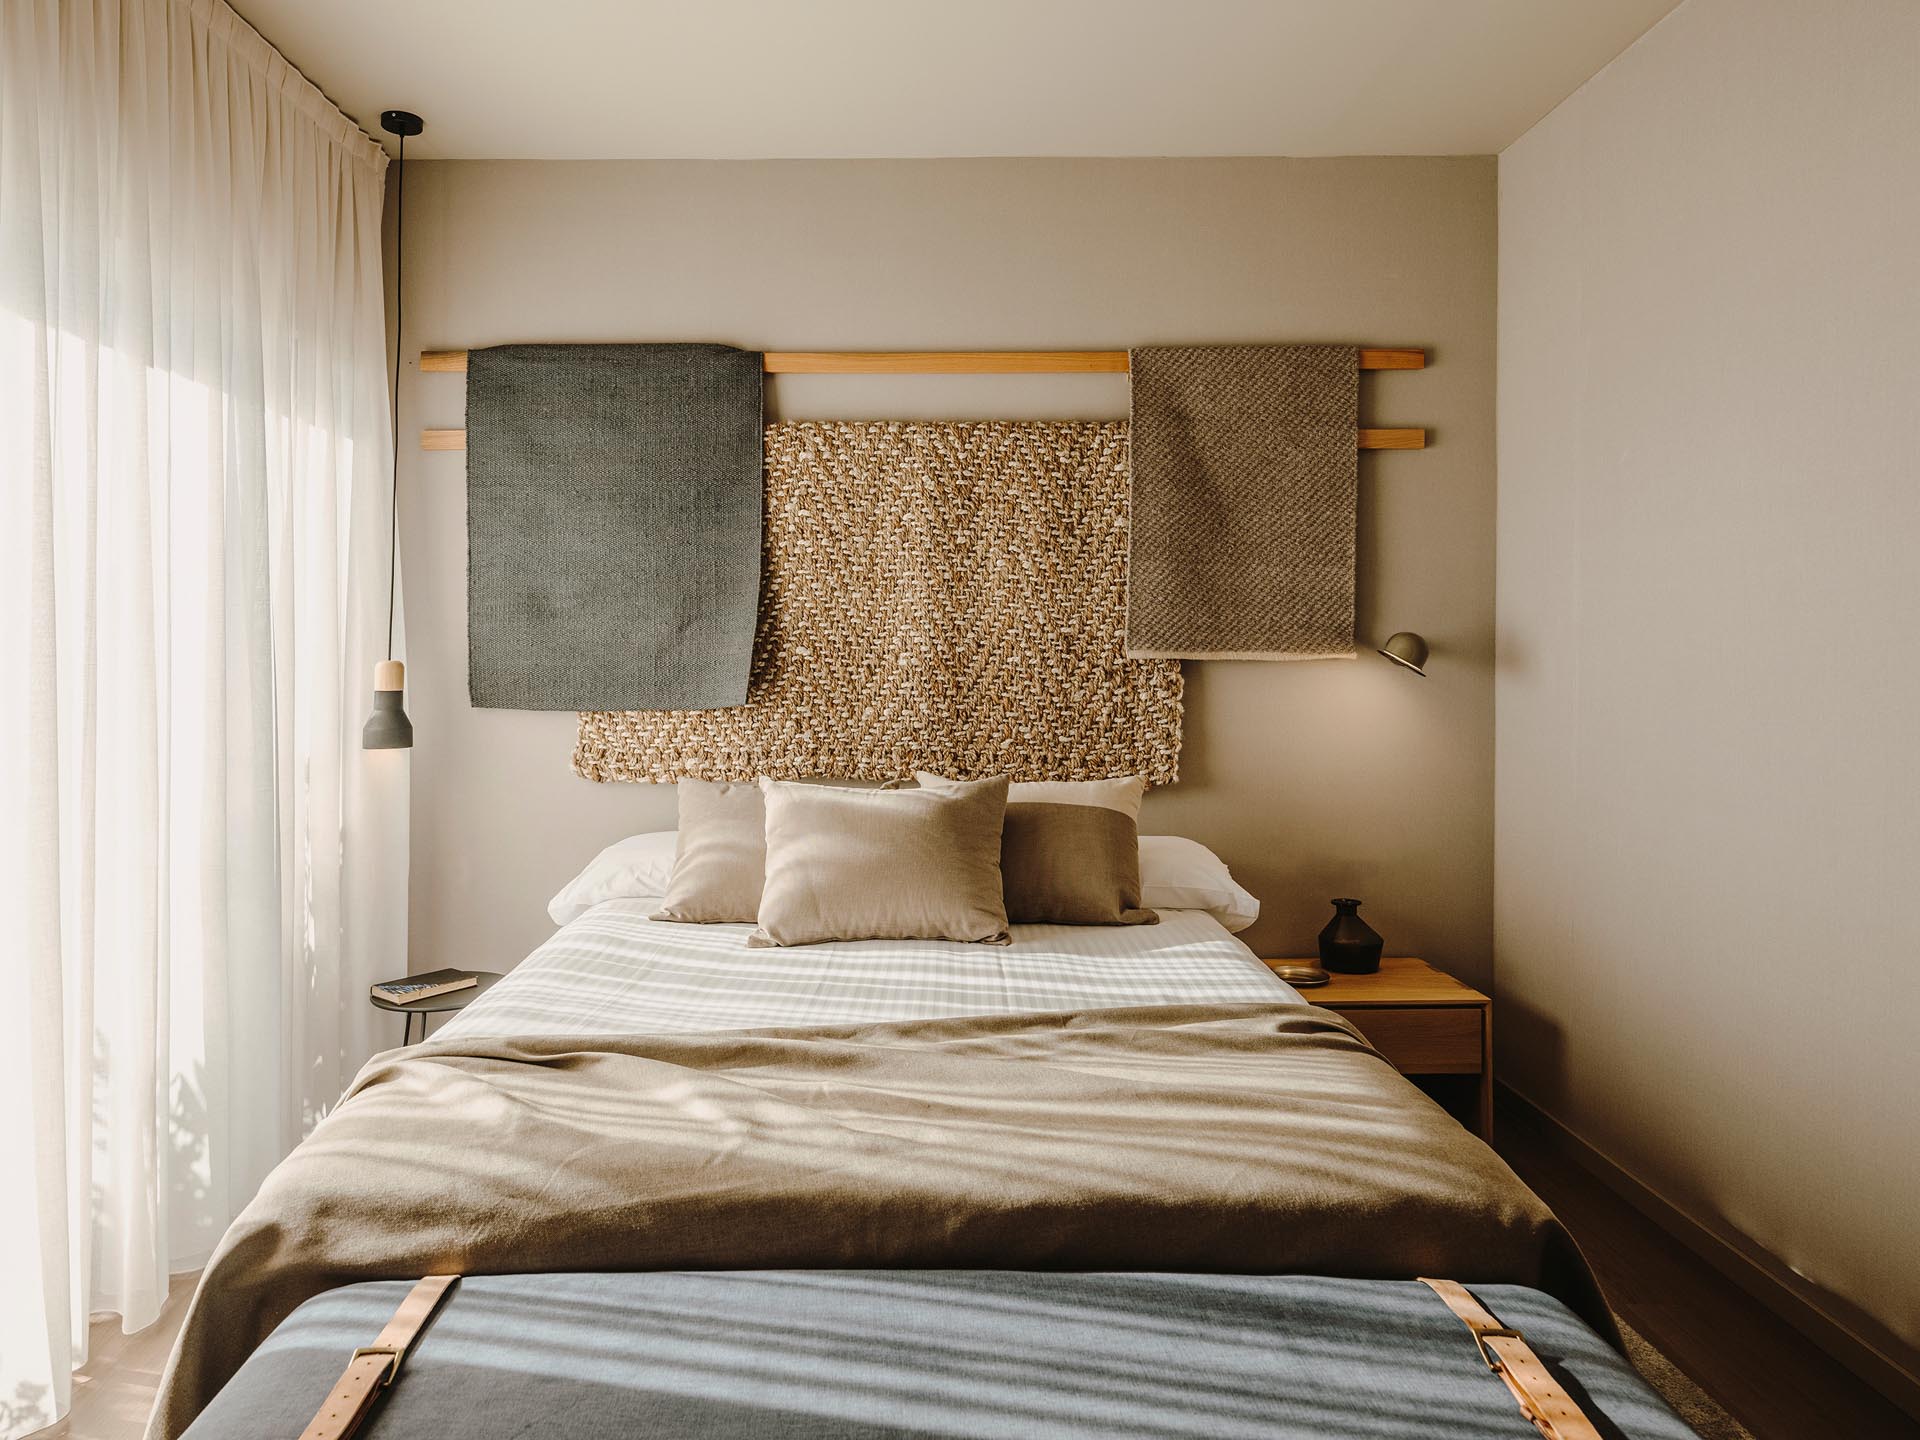 Wood lengths with draped fabric creates a unique wall decor installation in a bedroom